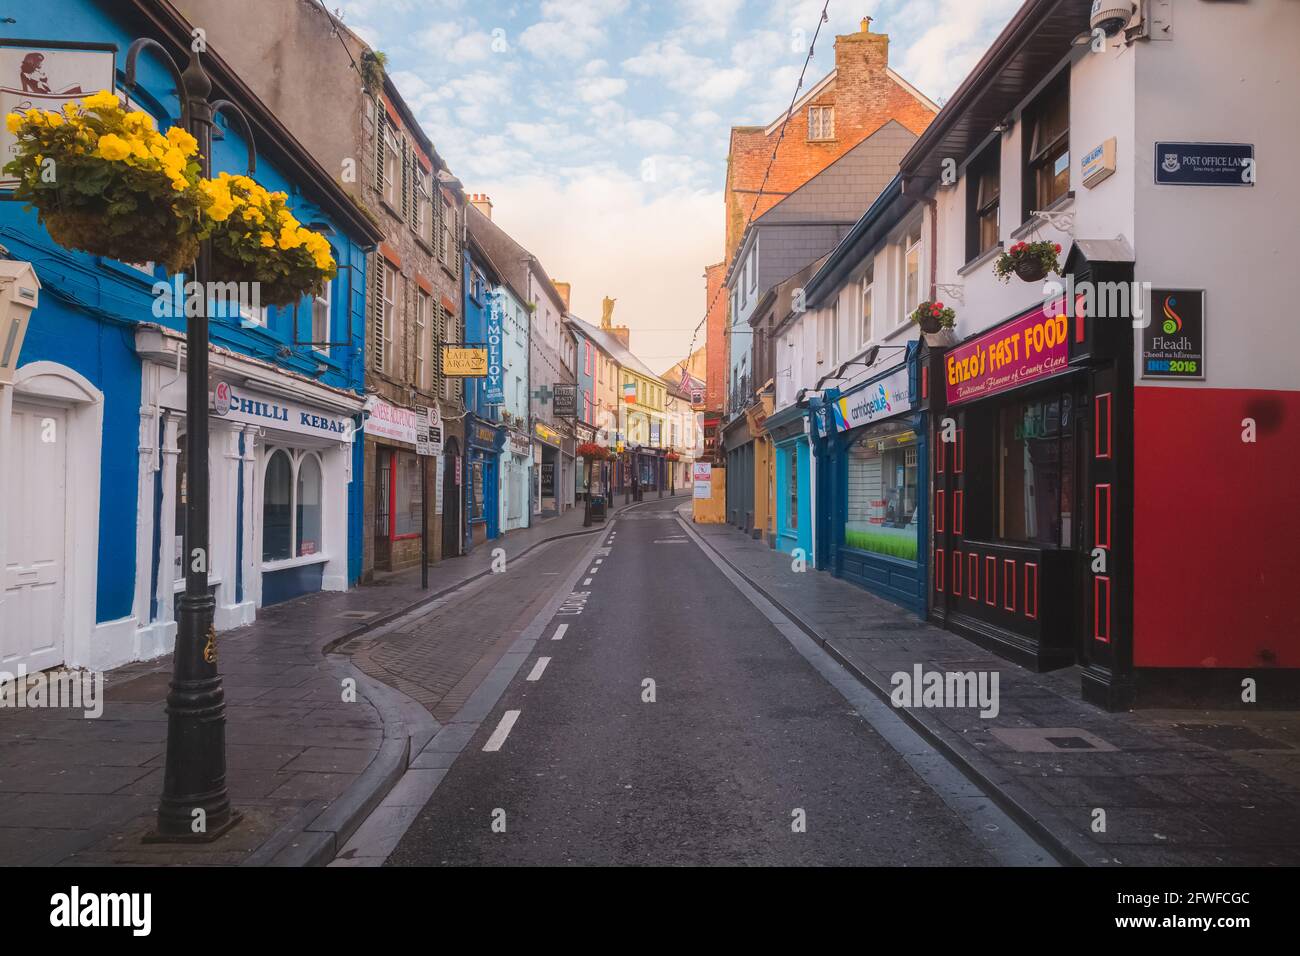 Ennis, Ireland - September 10 2016: The narrow Parnell street in the quaint, charming old town of Ennis, Ireland at with golden sunset or sunrise ligh Stock Photo